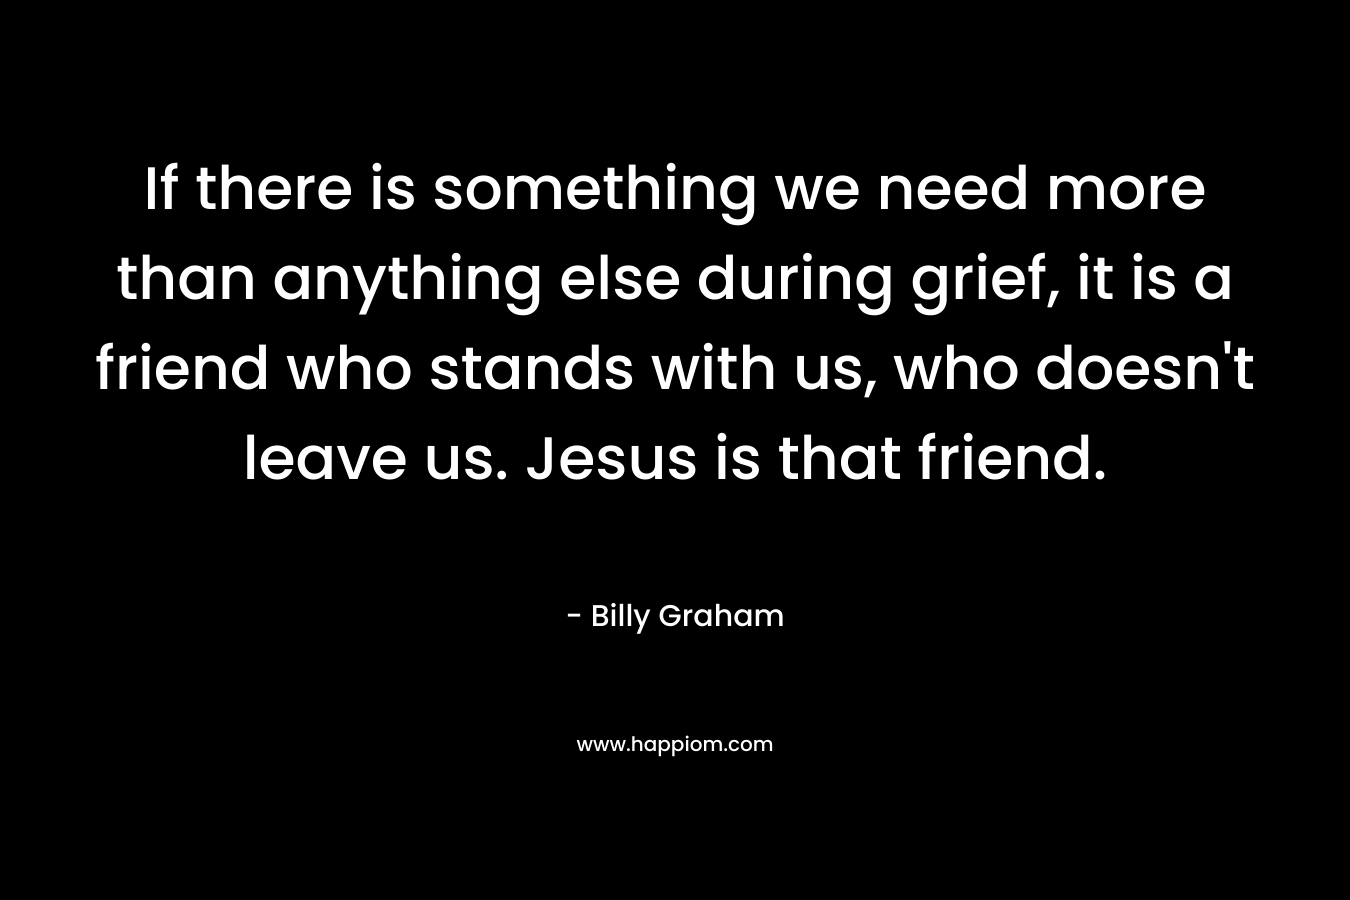 If there is something we need more than anything else during grief, it is a friend who stands with us, who doesn't leave us. Jesus is that friend.